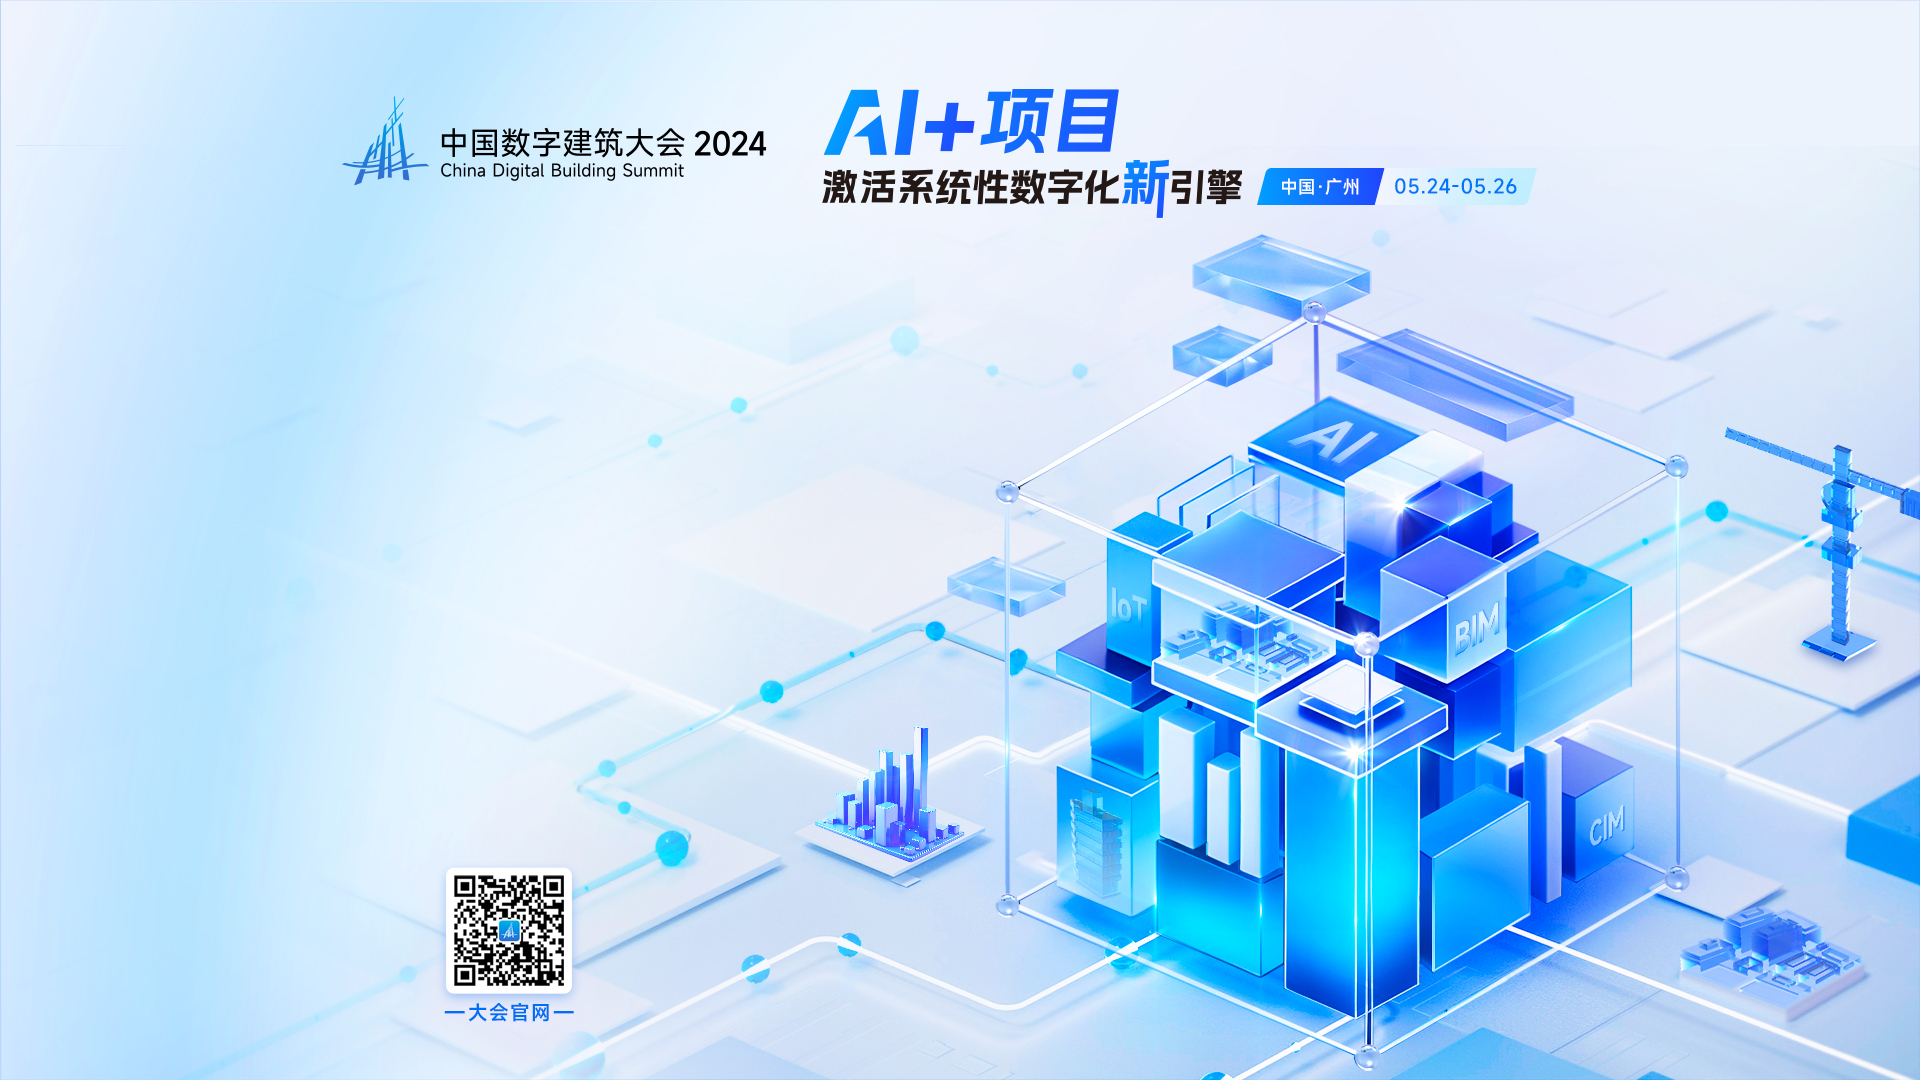 Glodon Unveils AecGPT and AI Platform for Construction Industry at China Digital Building Summit 2024